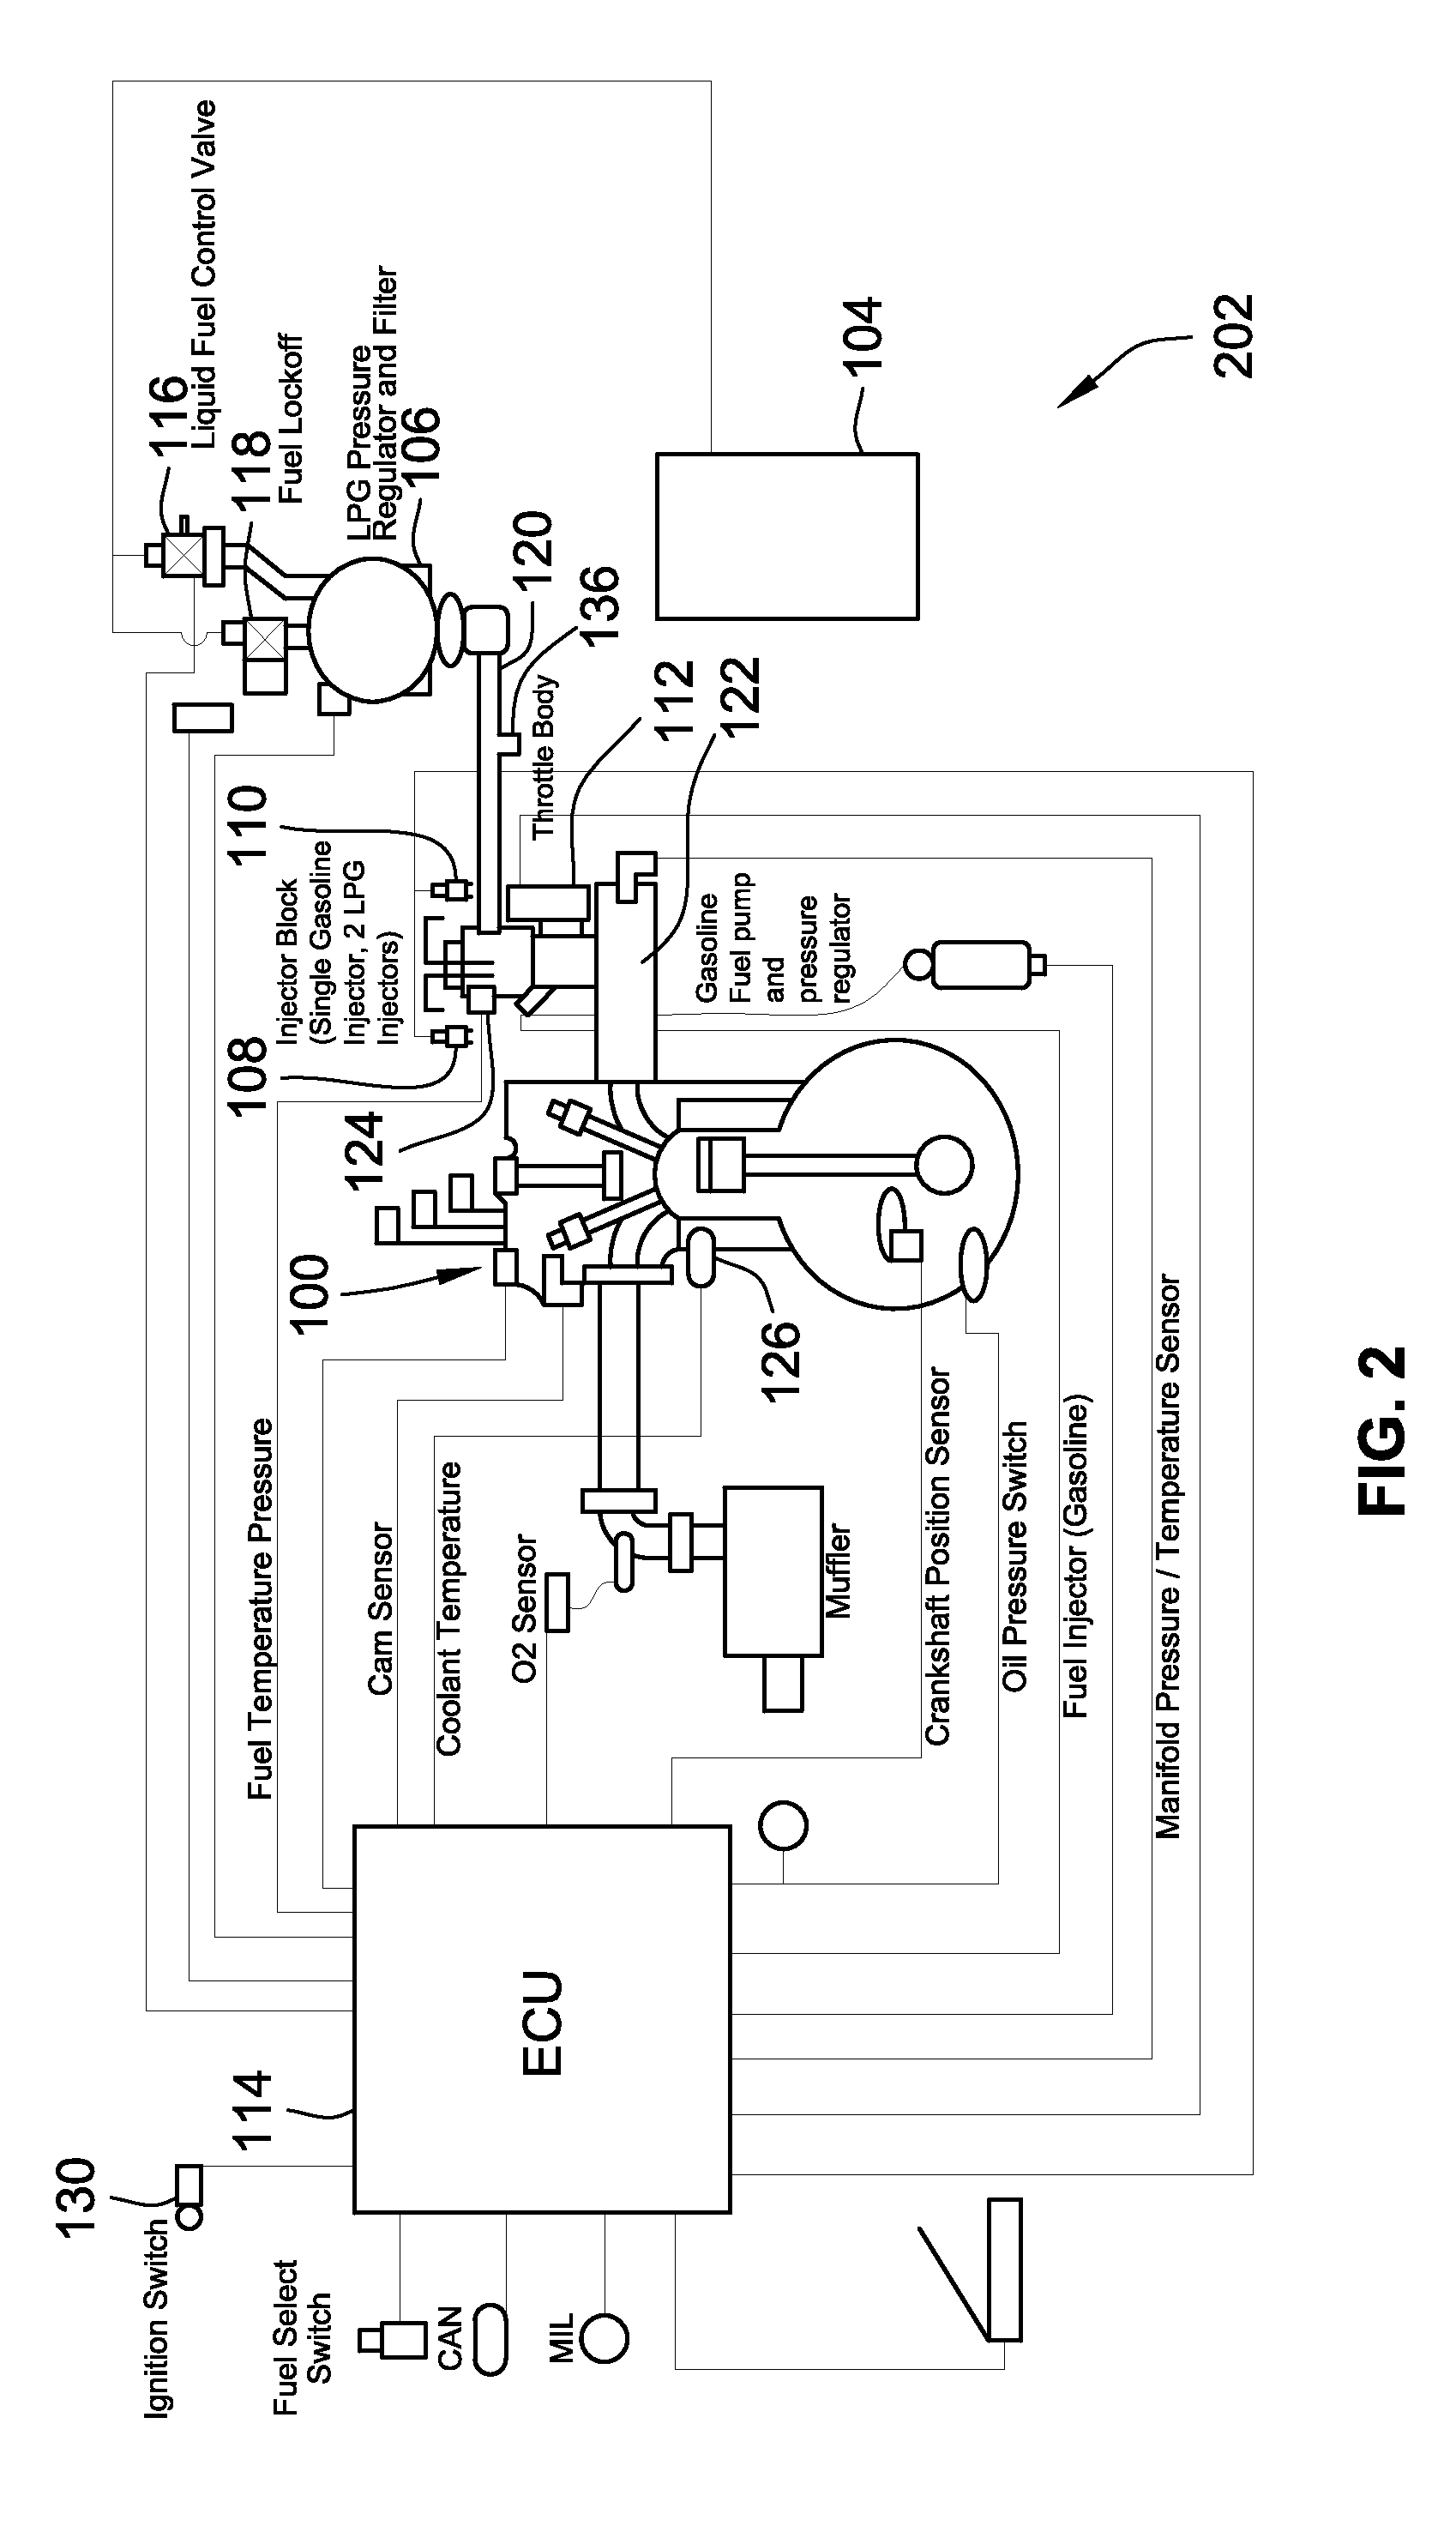 Cold-Start Fuel Control System